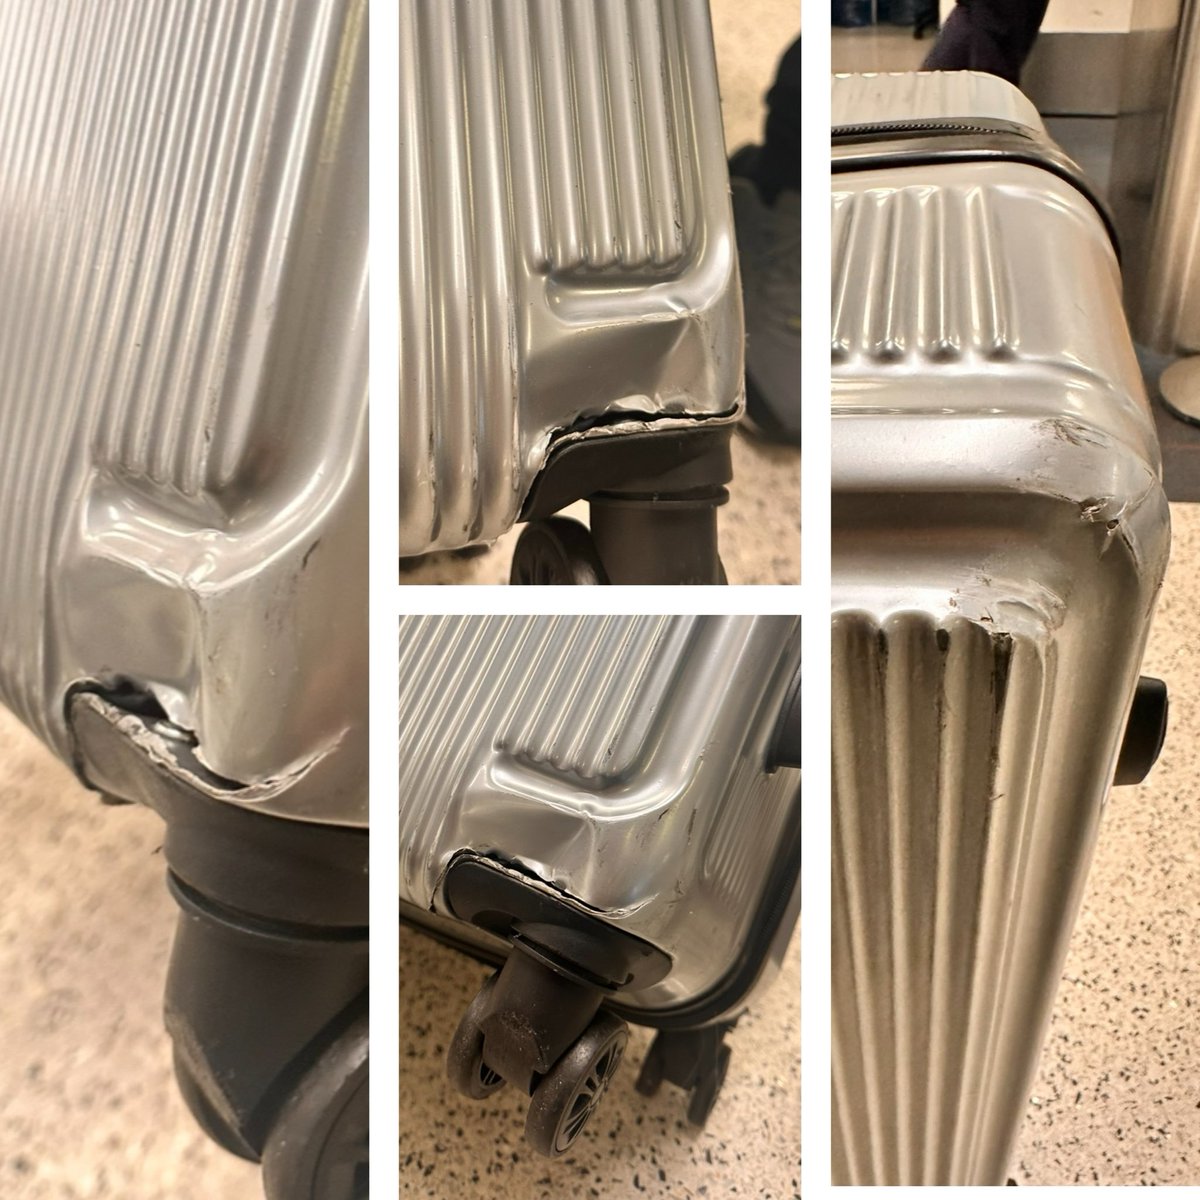 @AmericanAir airline broke my new suitcase back in November/December I was traveling from LAX TO TULSA. And this is how they handed over my new suitcase I put a claim before leaving airport and never compensated me for a new one